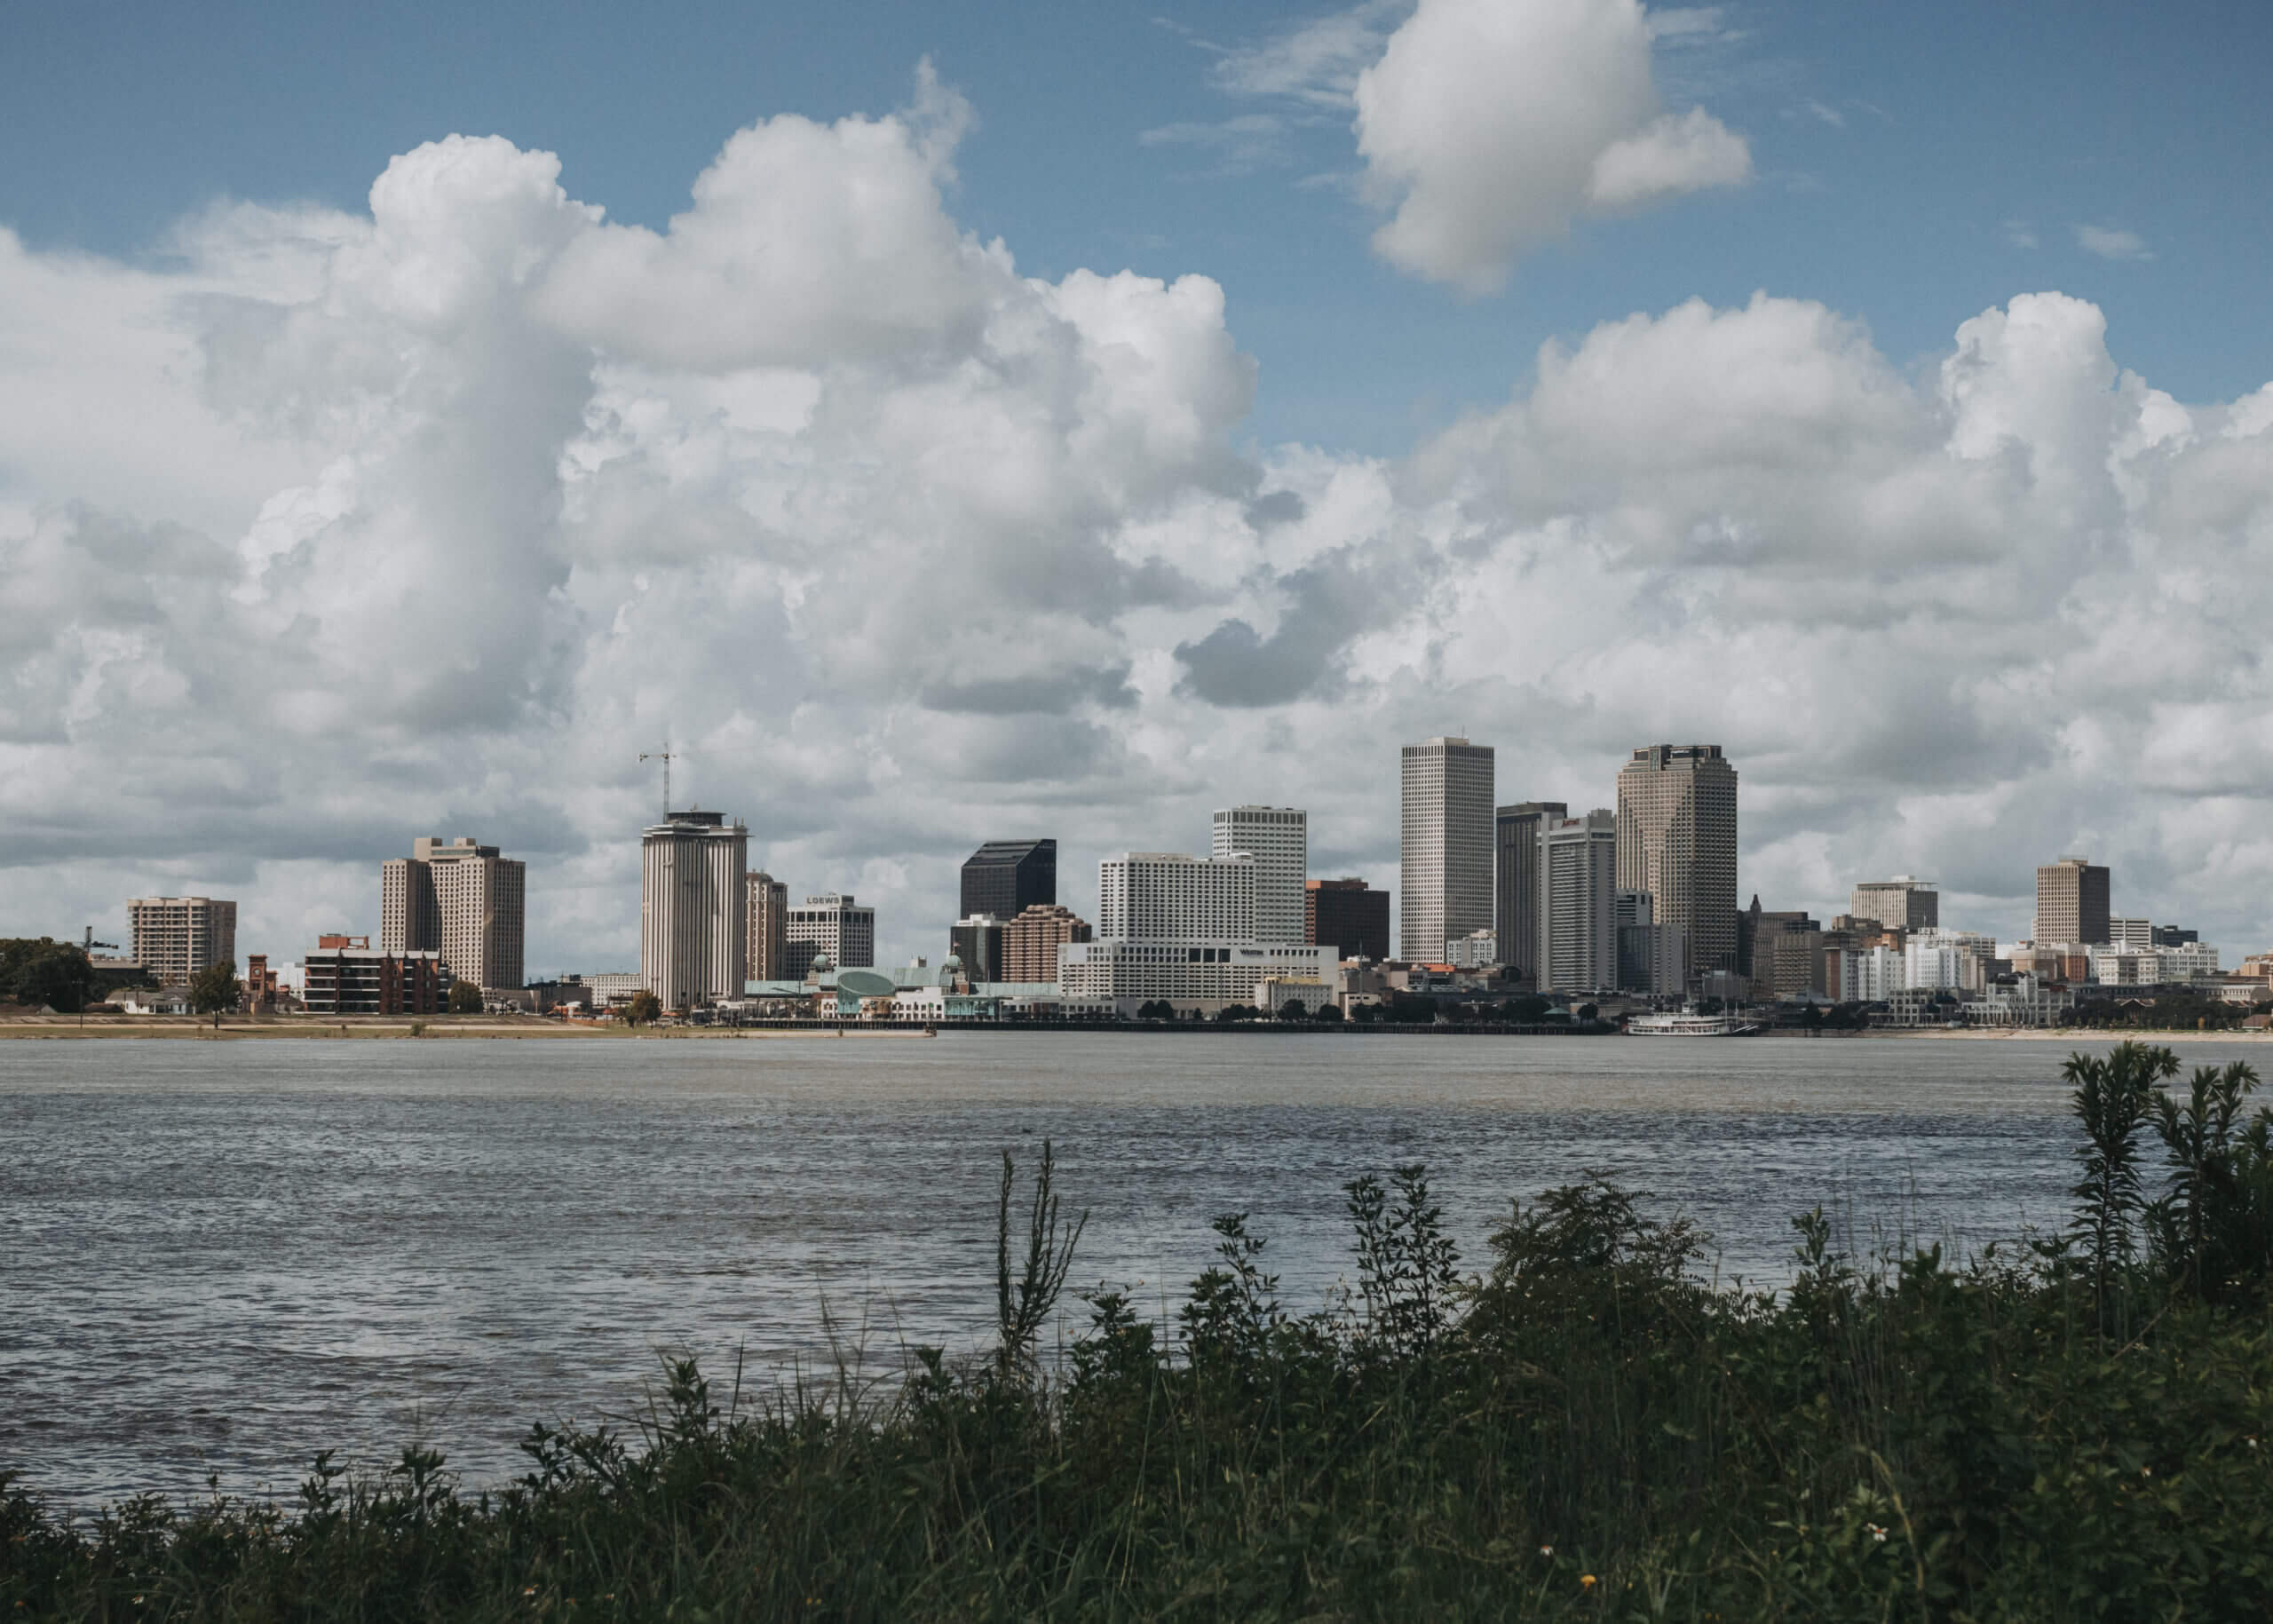 waterfront of New Orleans from the historic 4th ward.